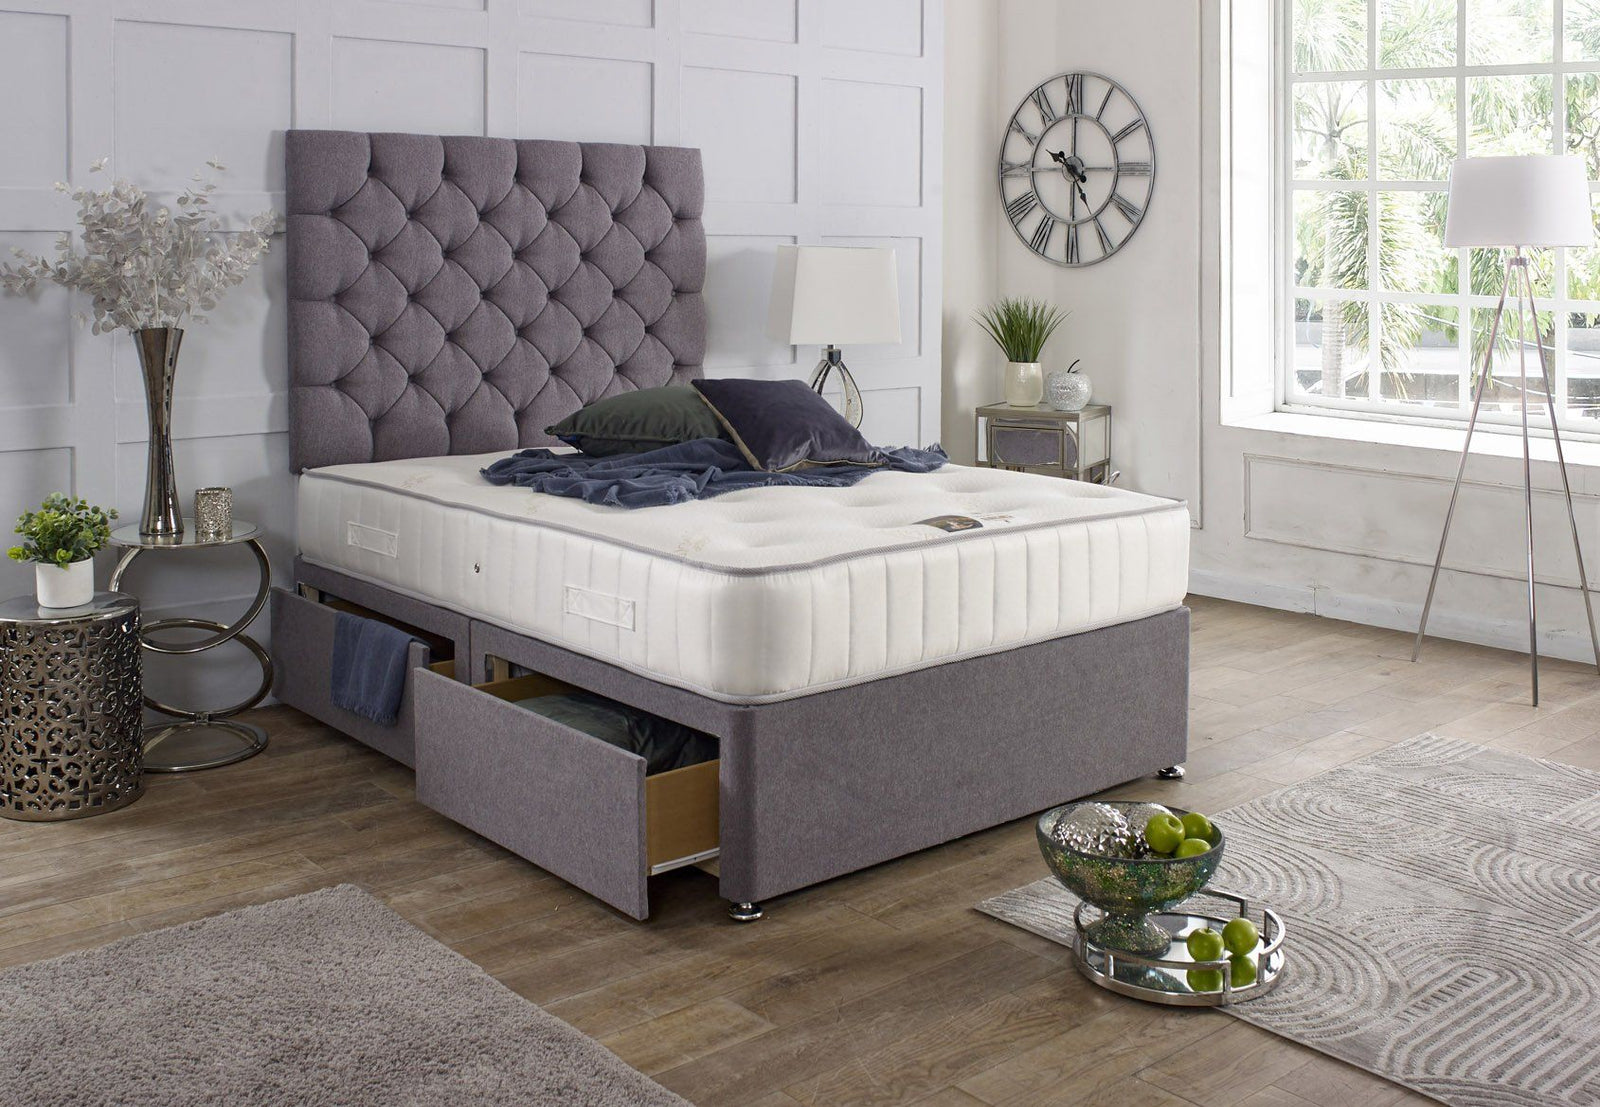 Divan Beds Selling-Points That You Need to Know